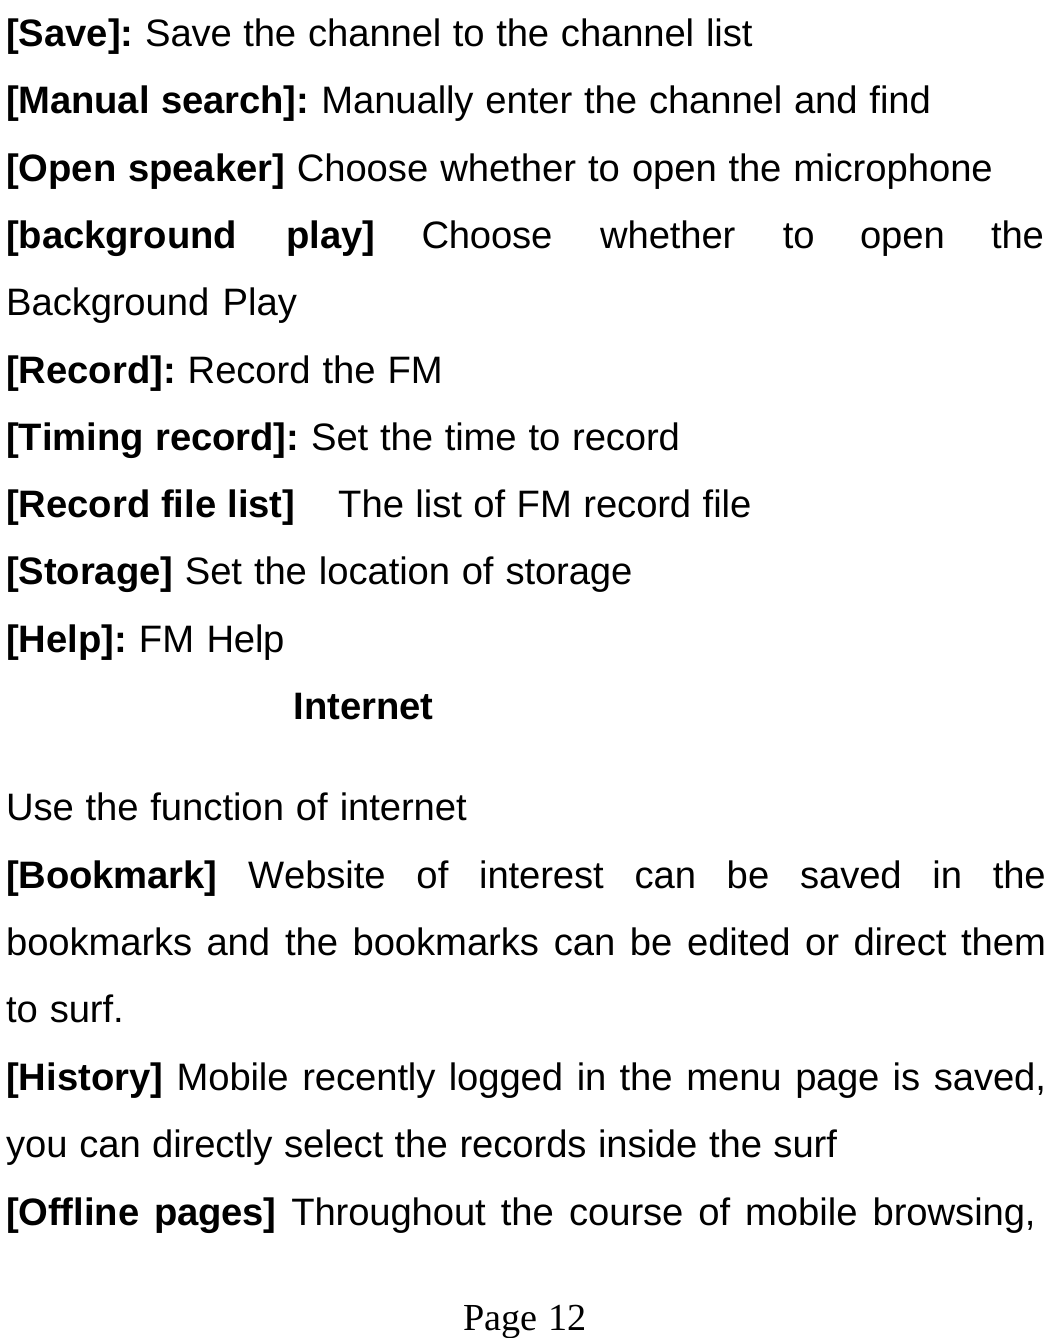 Page 12[Save]: Save the channel to the channel list [Manual search]: Manually enter the channel and find [Open speaker] Choose whether to open the microphone [background play] Choose whether to open the Background Play [Record]: Record the FM [Timing record]: Set the time to record [Record file list]  The list of FM record file [Storage] Set the location of storage [Help]: FM Help Internet Use the function of internet [Bookmark]  Website of interest can be saved in the bookmarks and the bookmarks can be edited or direct them to surf. [History] Mobile recently logged in the menu page is saved, you can directly select the records inside the surf [Offline pages] Throughout the course of mobile browsing, 